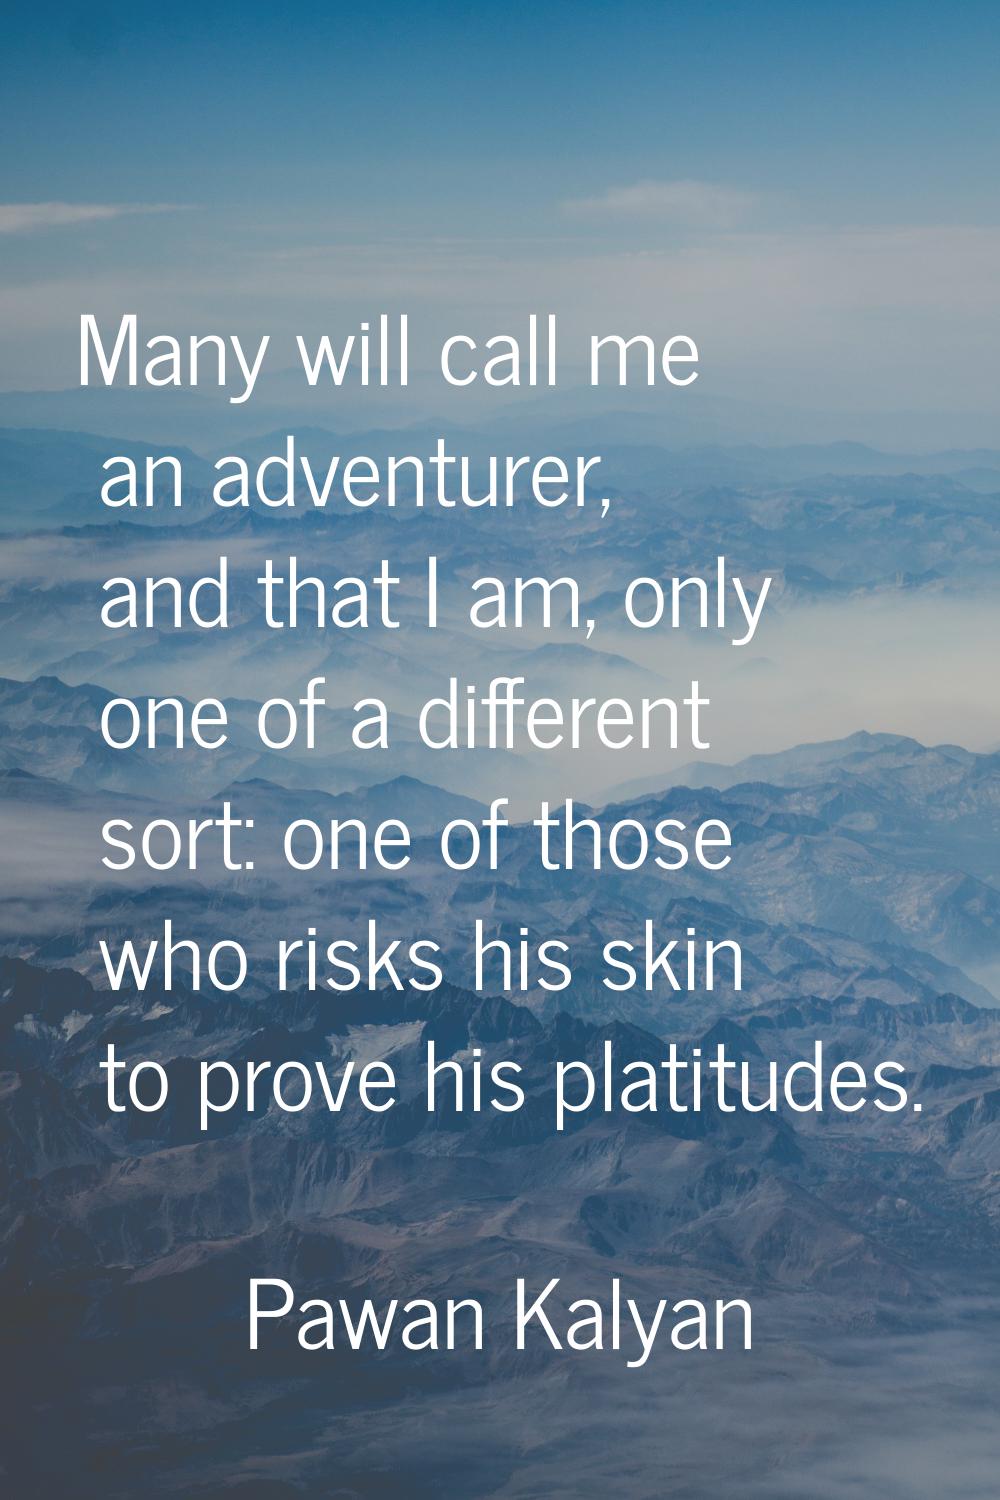 Many will call me an adventurer, and that I am, only one of a different sort: one of those who risk